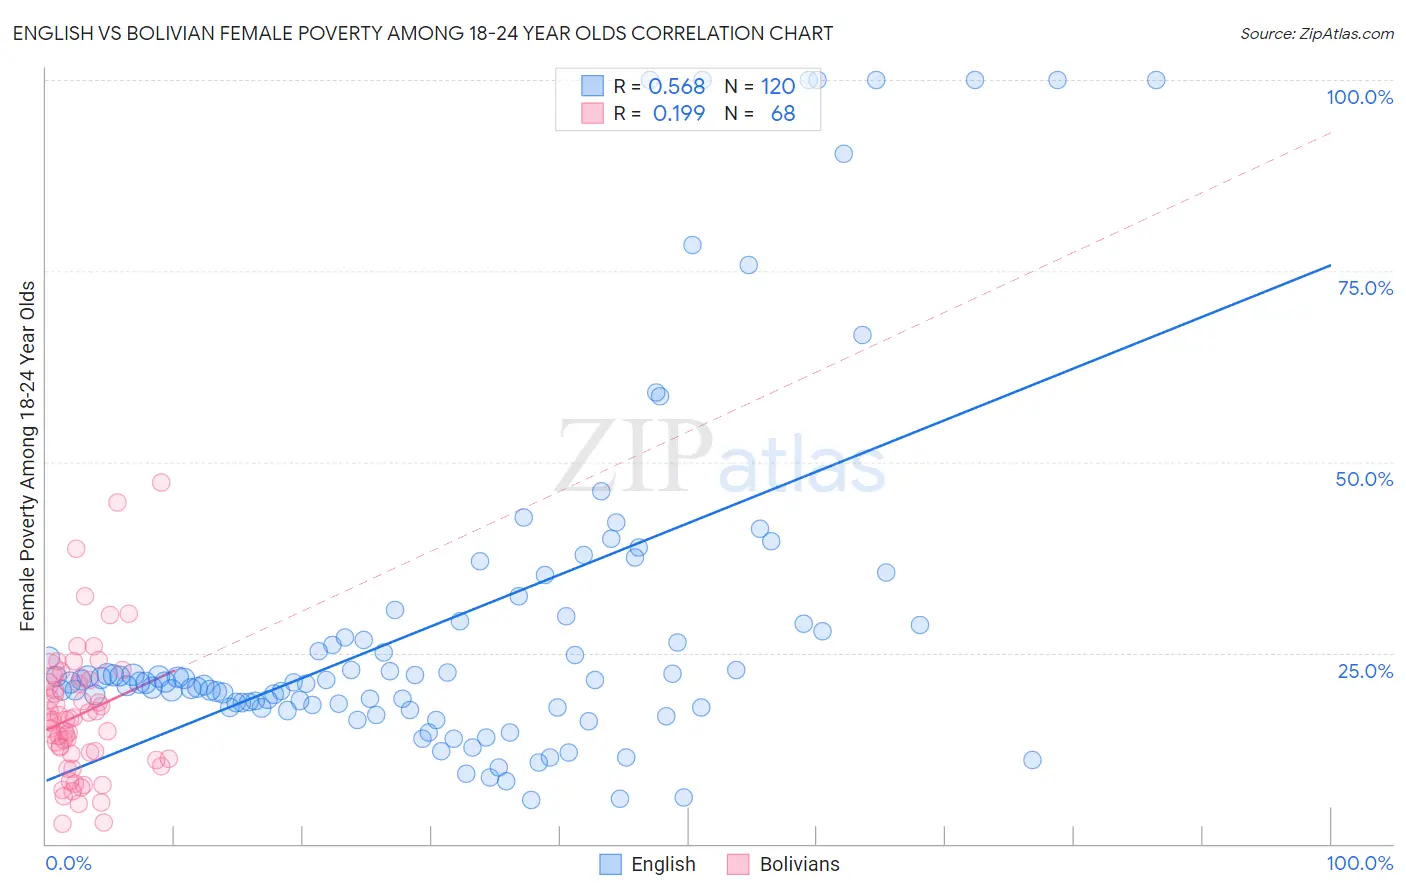 English vs Bolivian Female Poverty Among 18-24 Year Olds